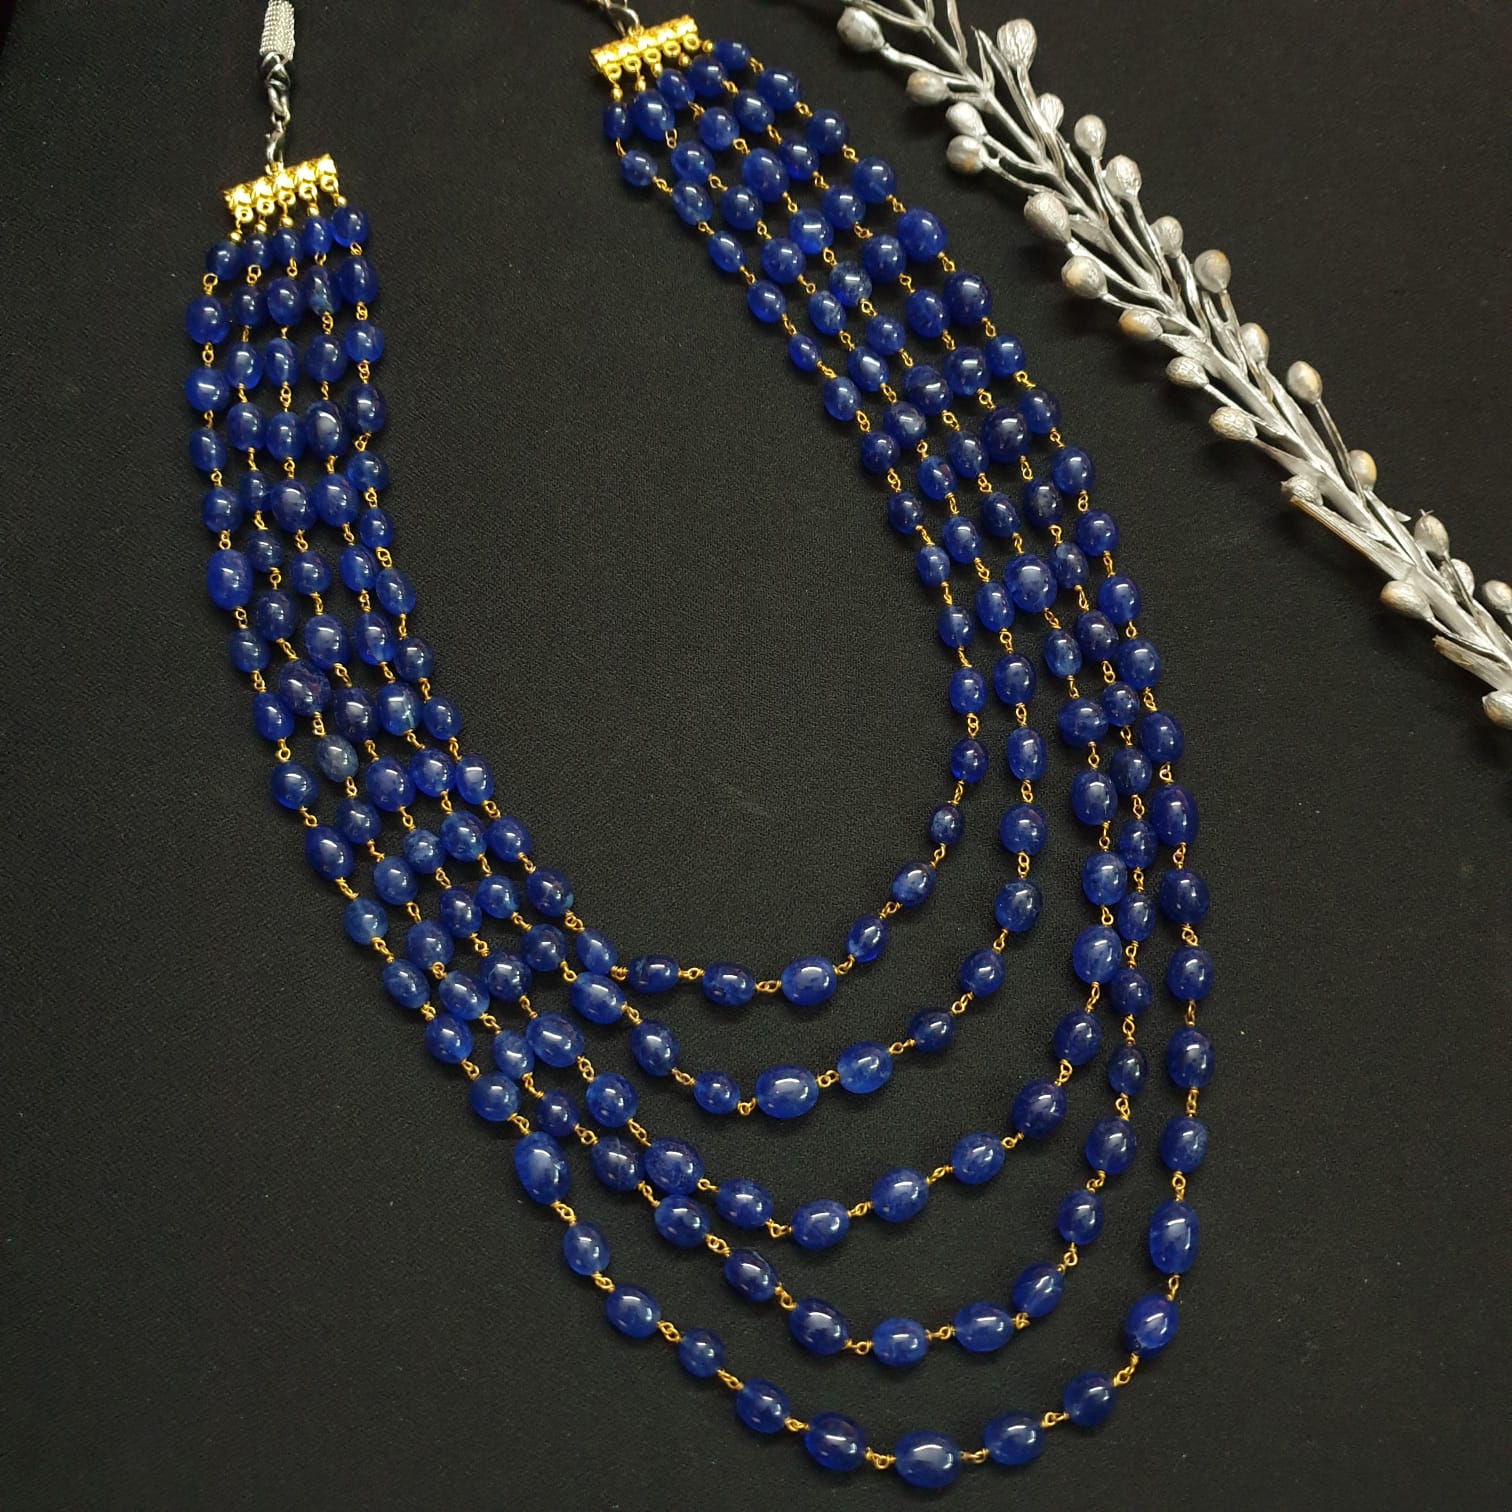 Five Layered Blue Stone Necklace